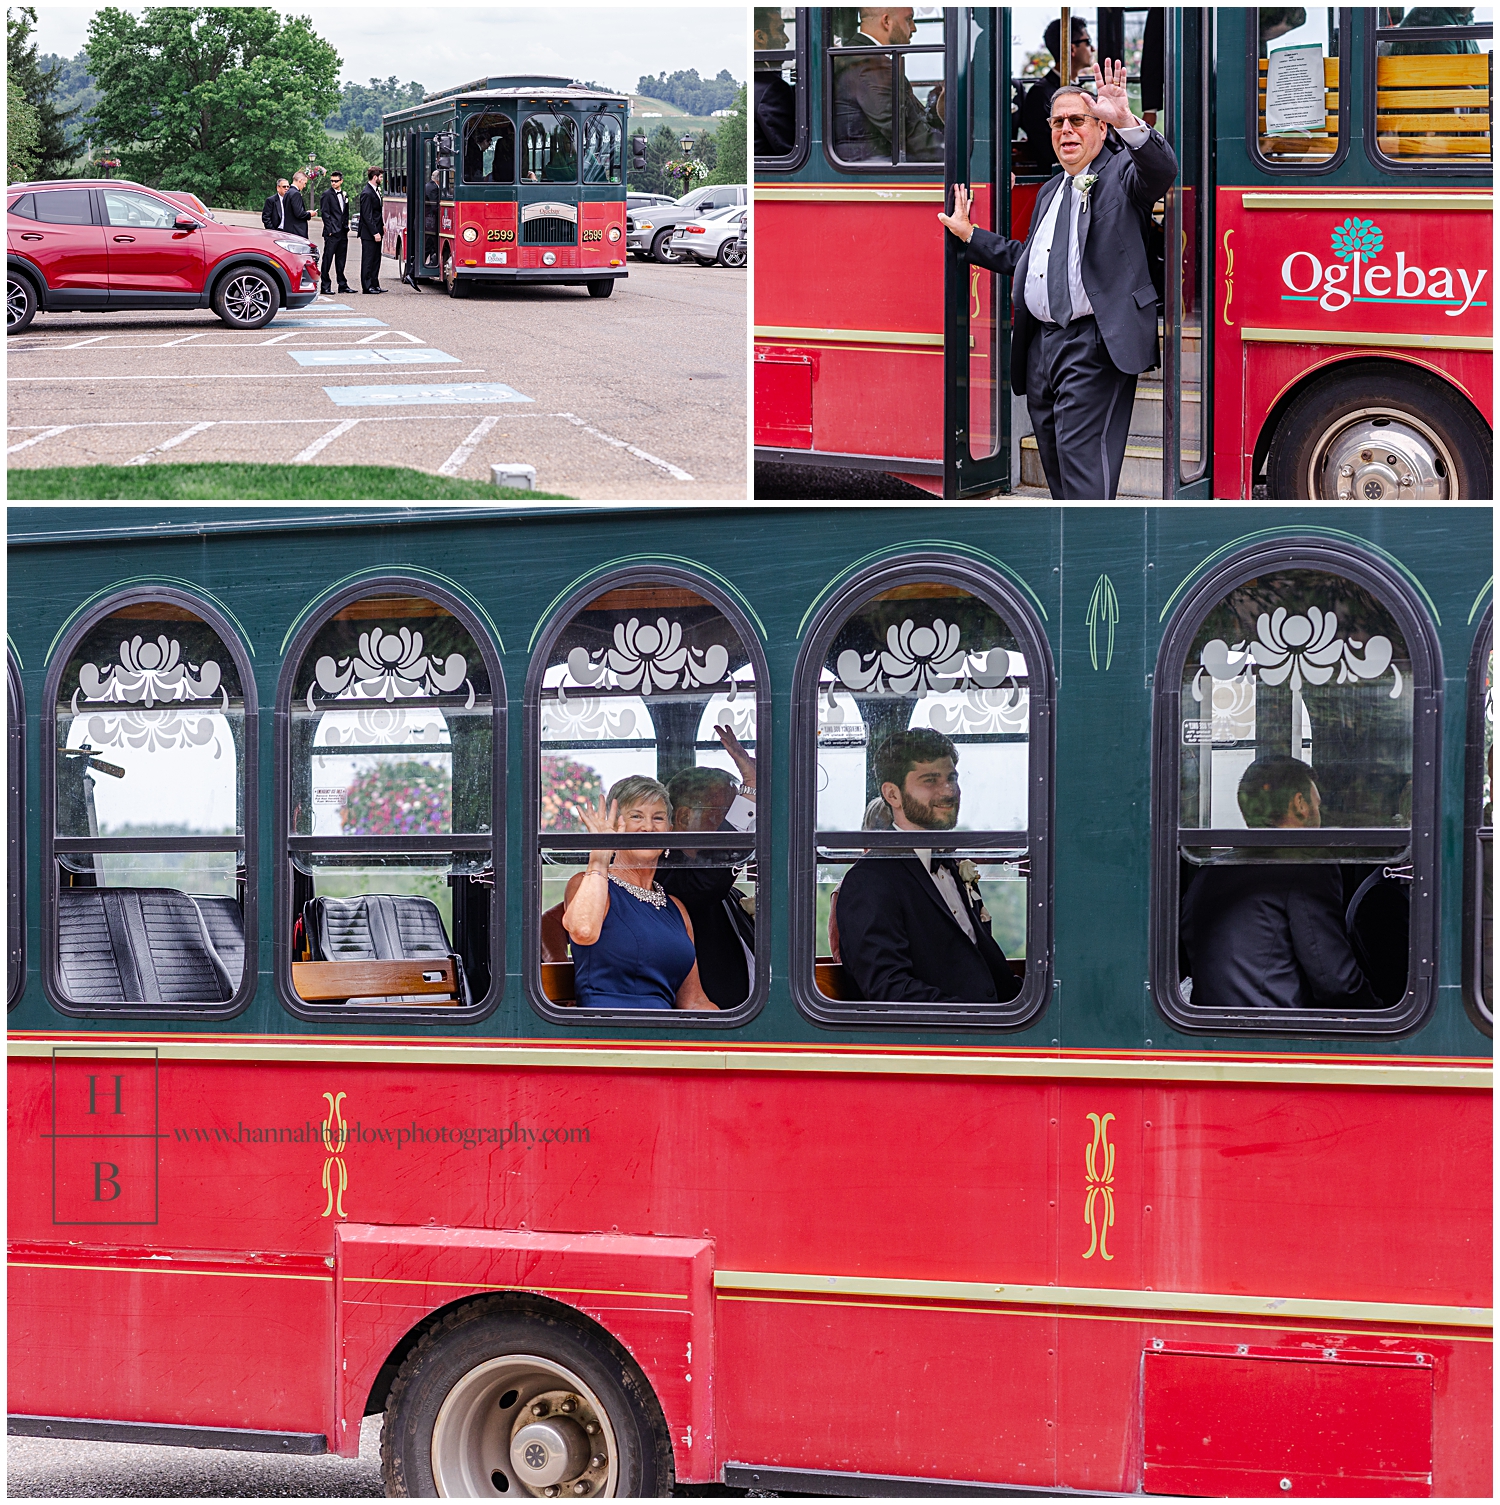 Family gets on red trolley and waves while departing for ceremony.